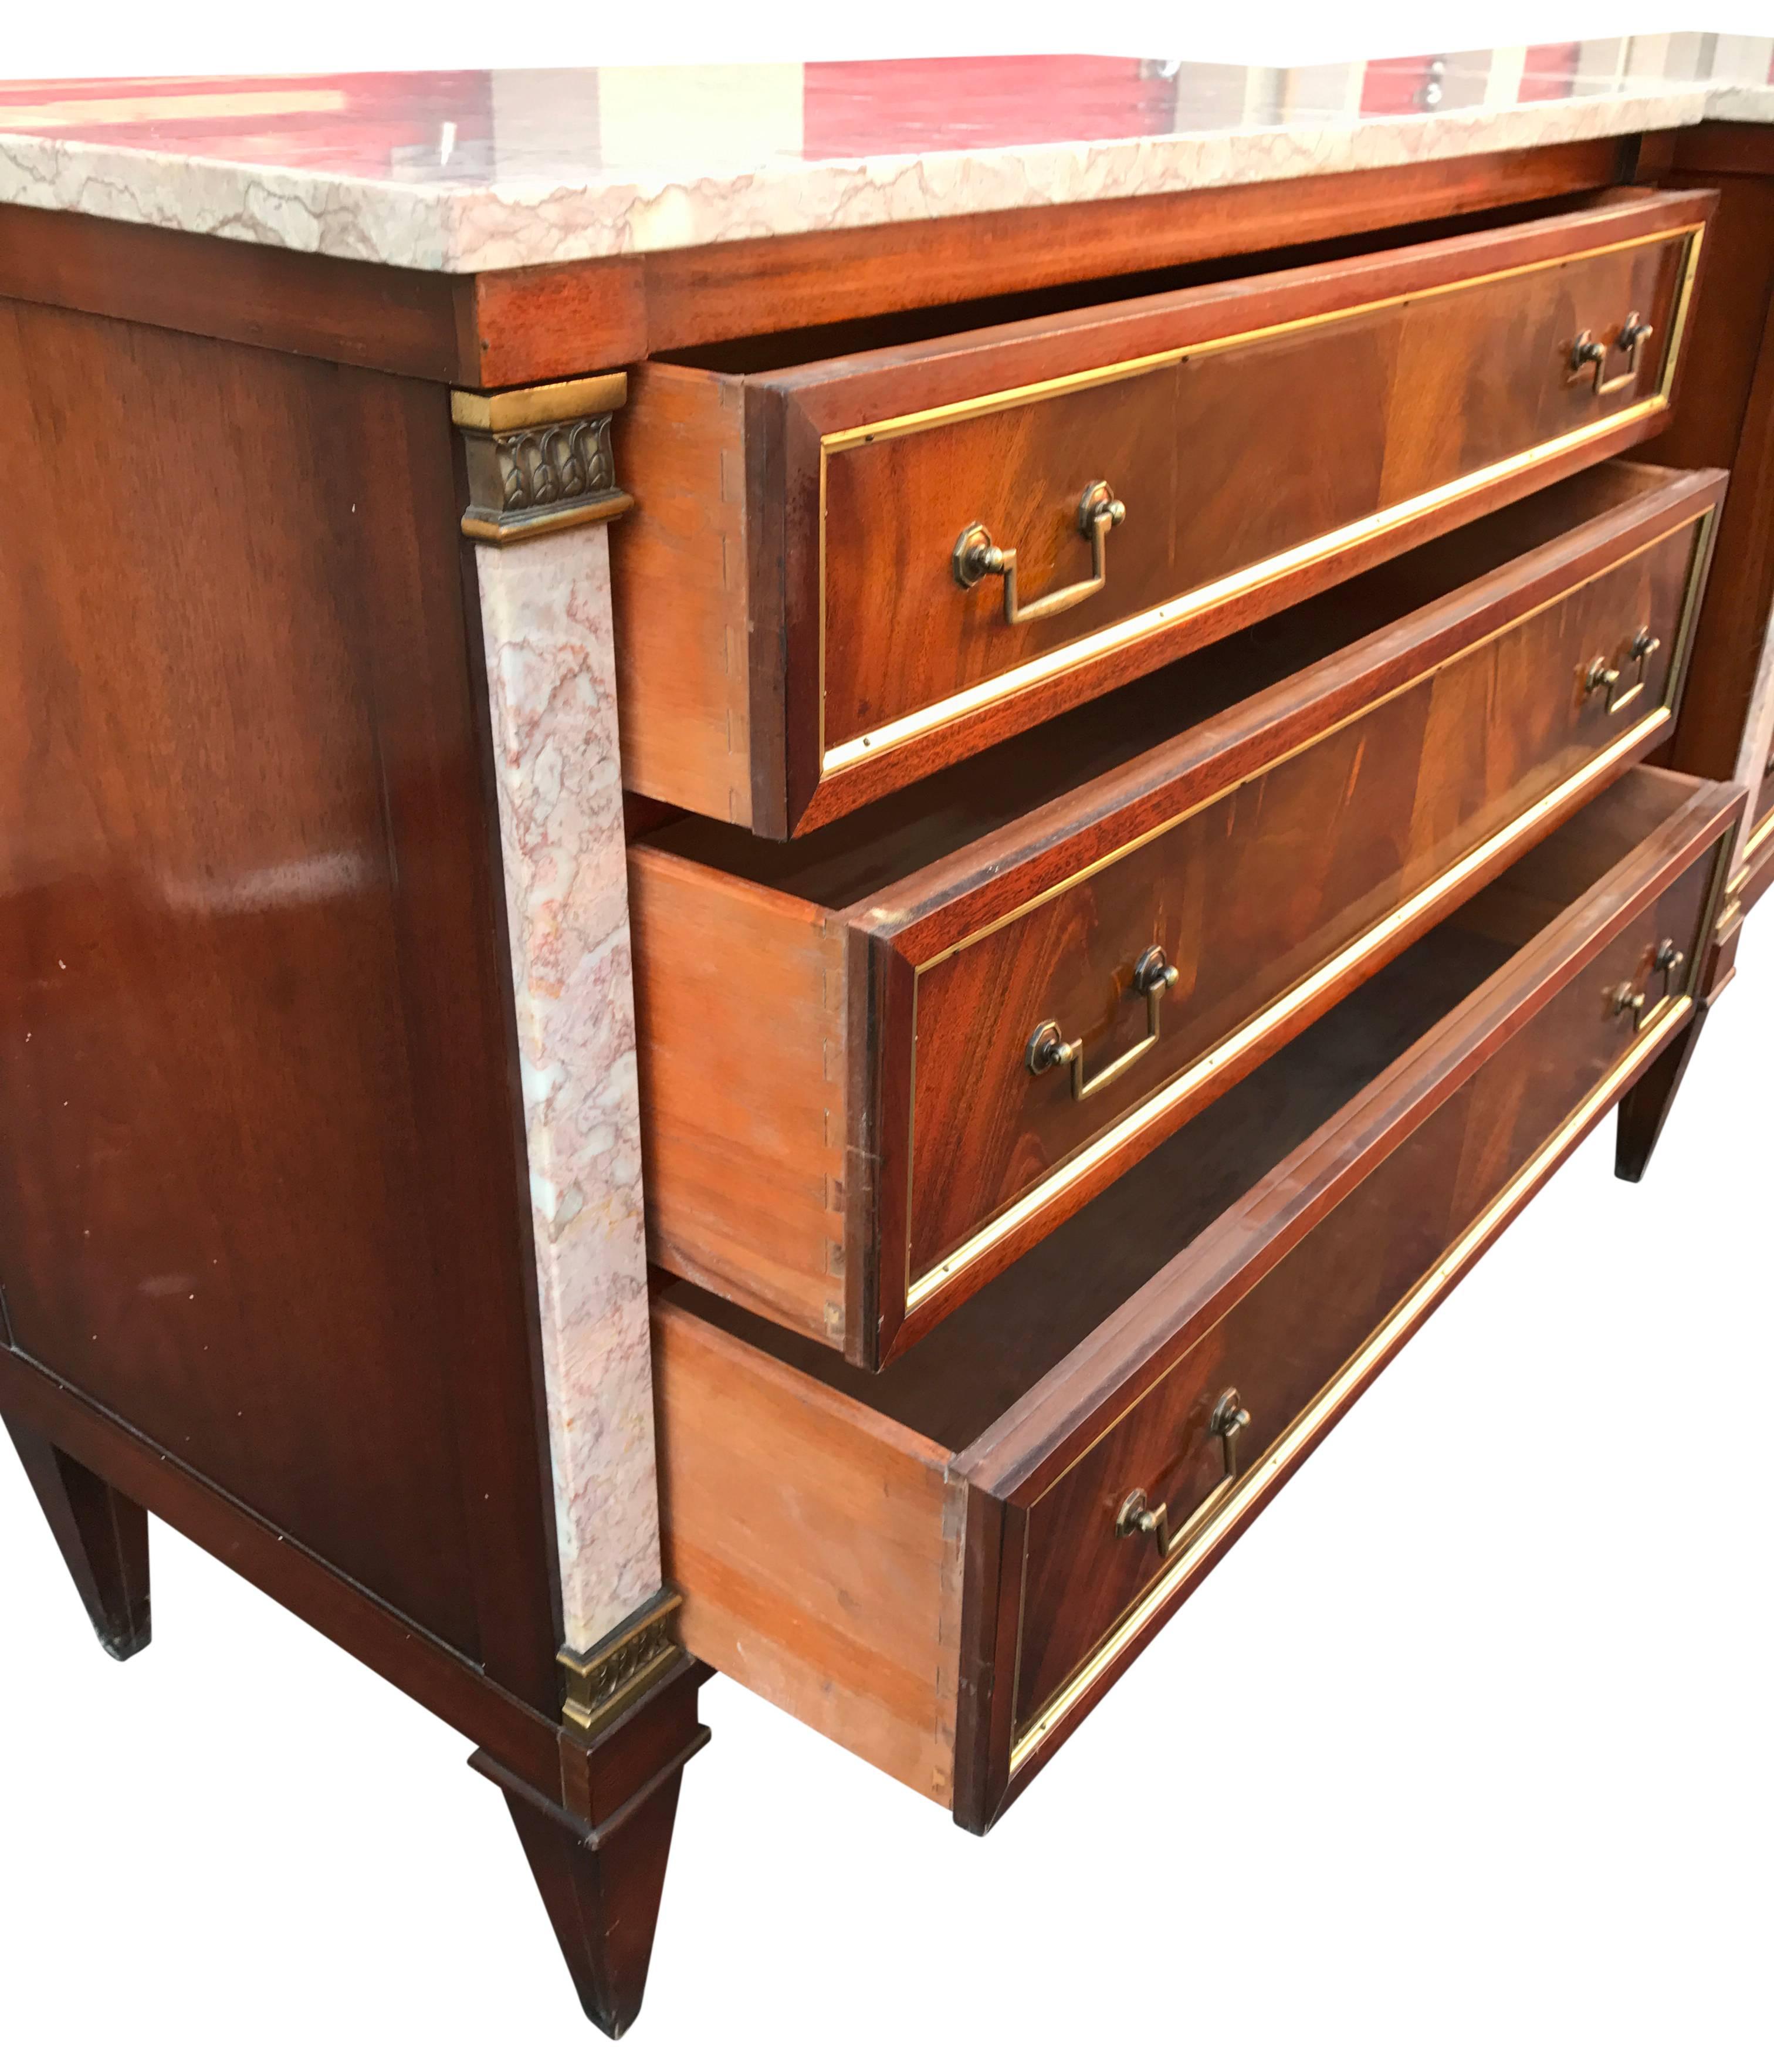 American Pair of 18th Century Style Marble-Mounted Chest of Dressers